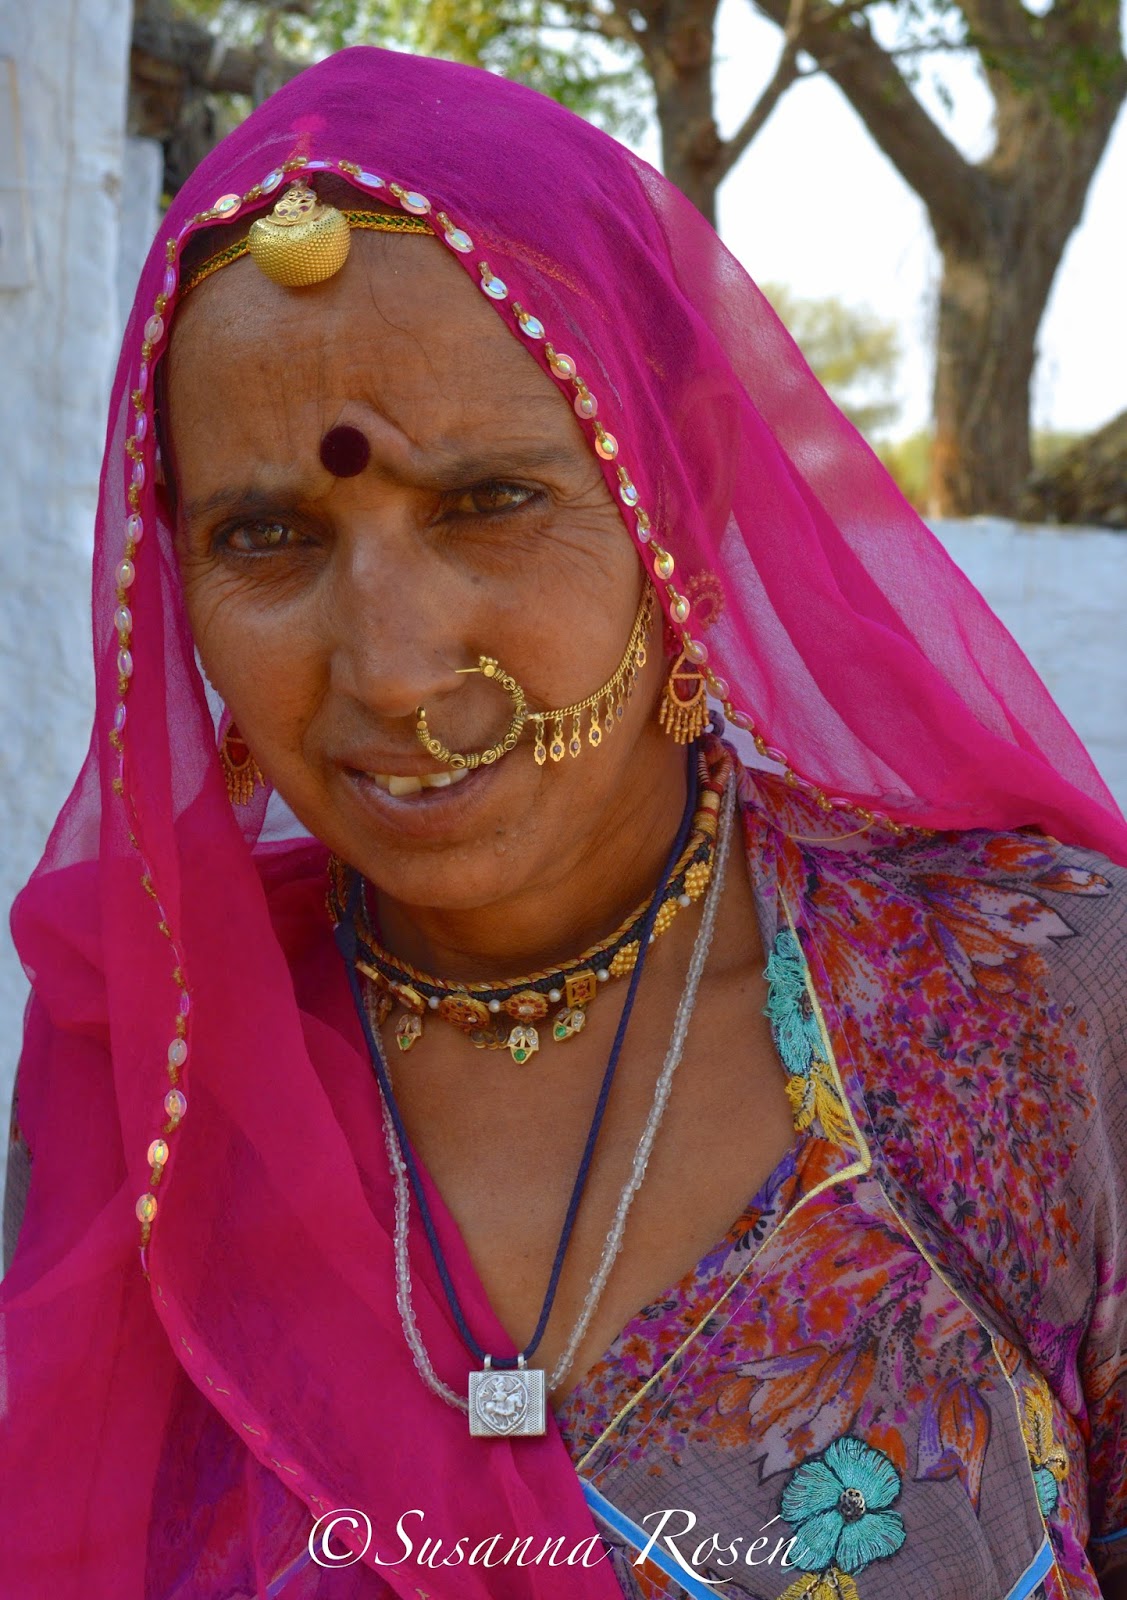 The House of Susanna / my life in India : The Bishnoi tribe welcomed us ...